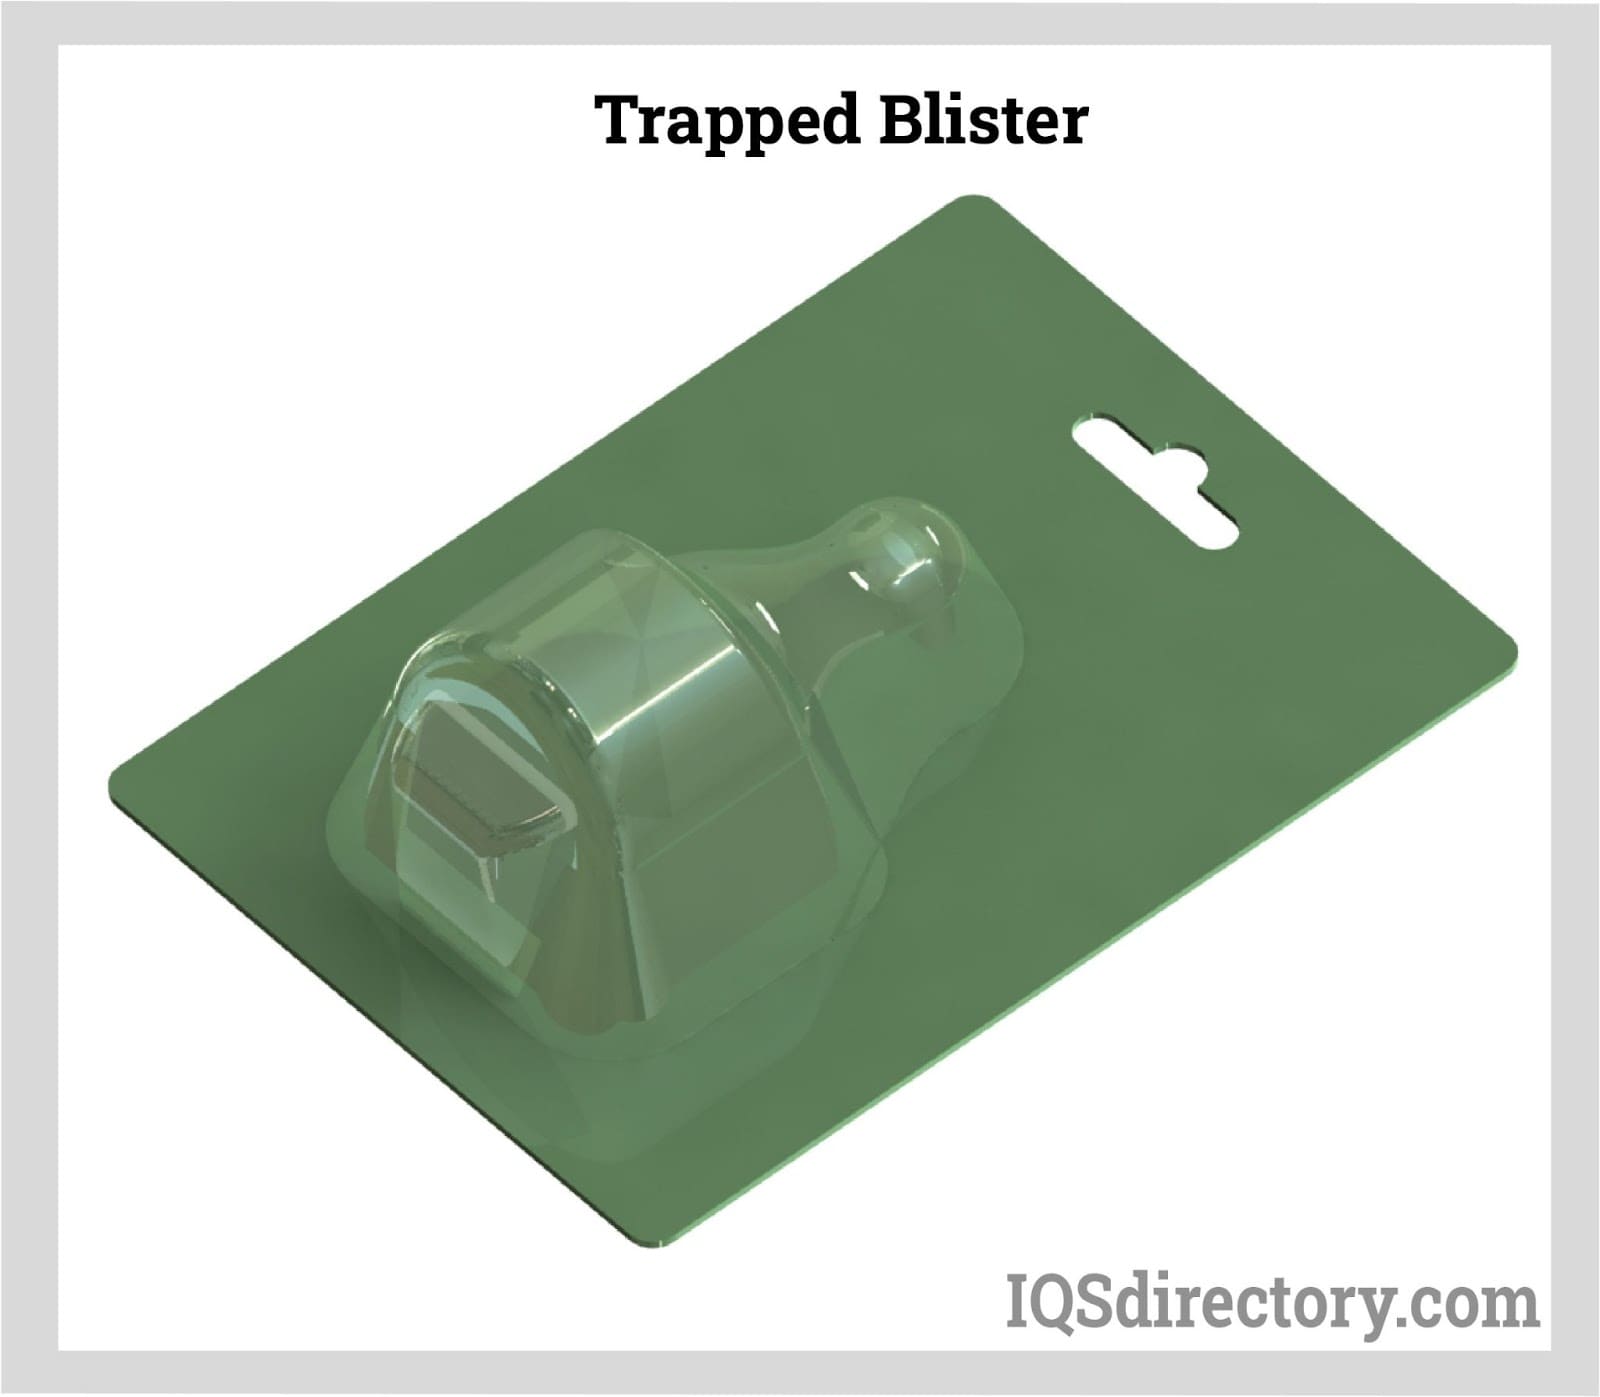 Trapped Blister